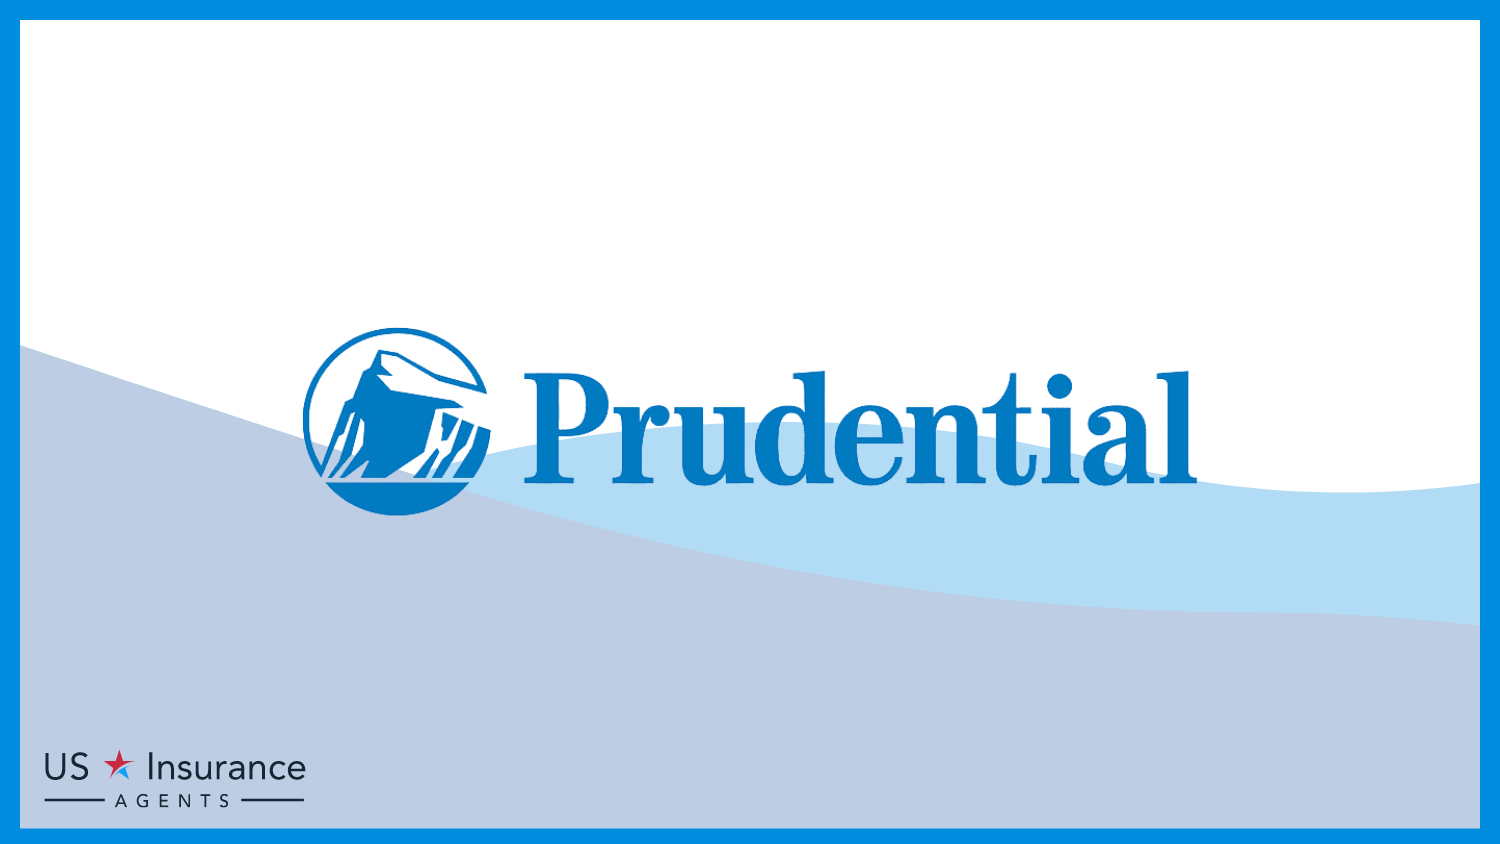 Prudential: Best Life Insurance for SSI Recipients